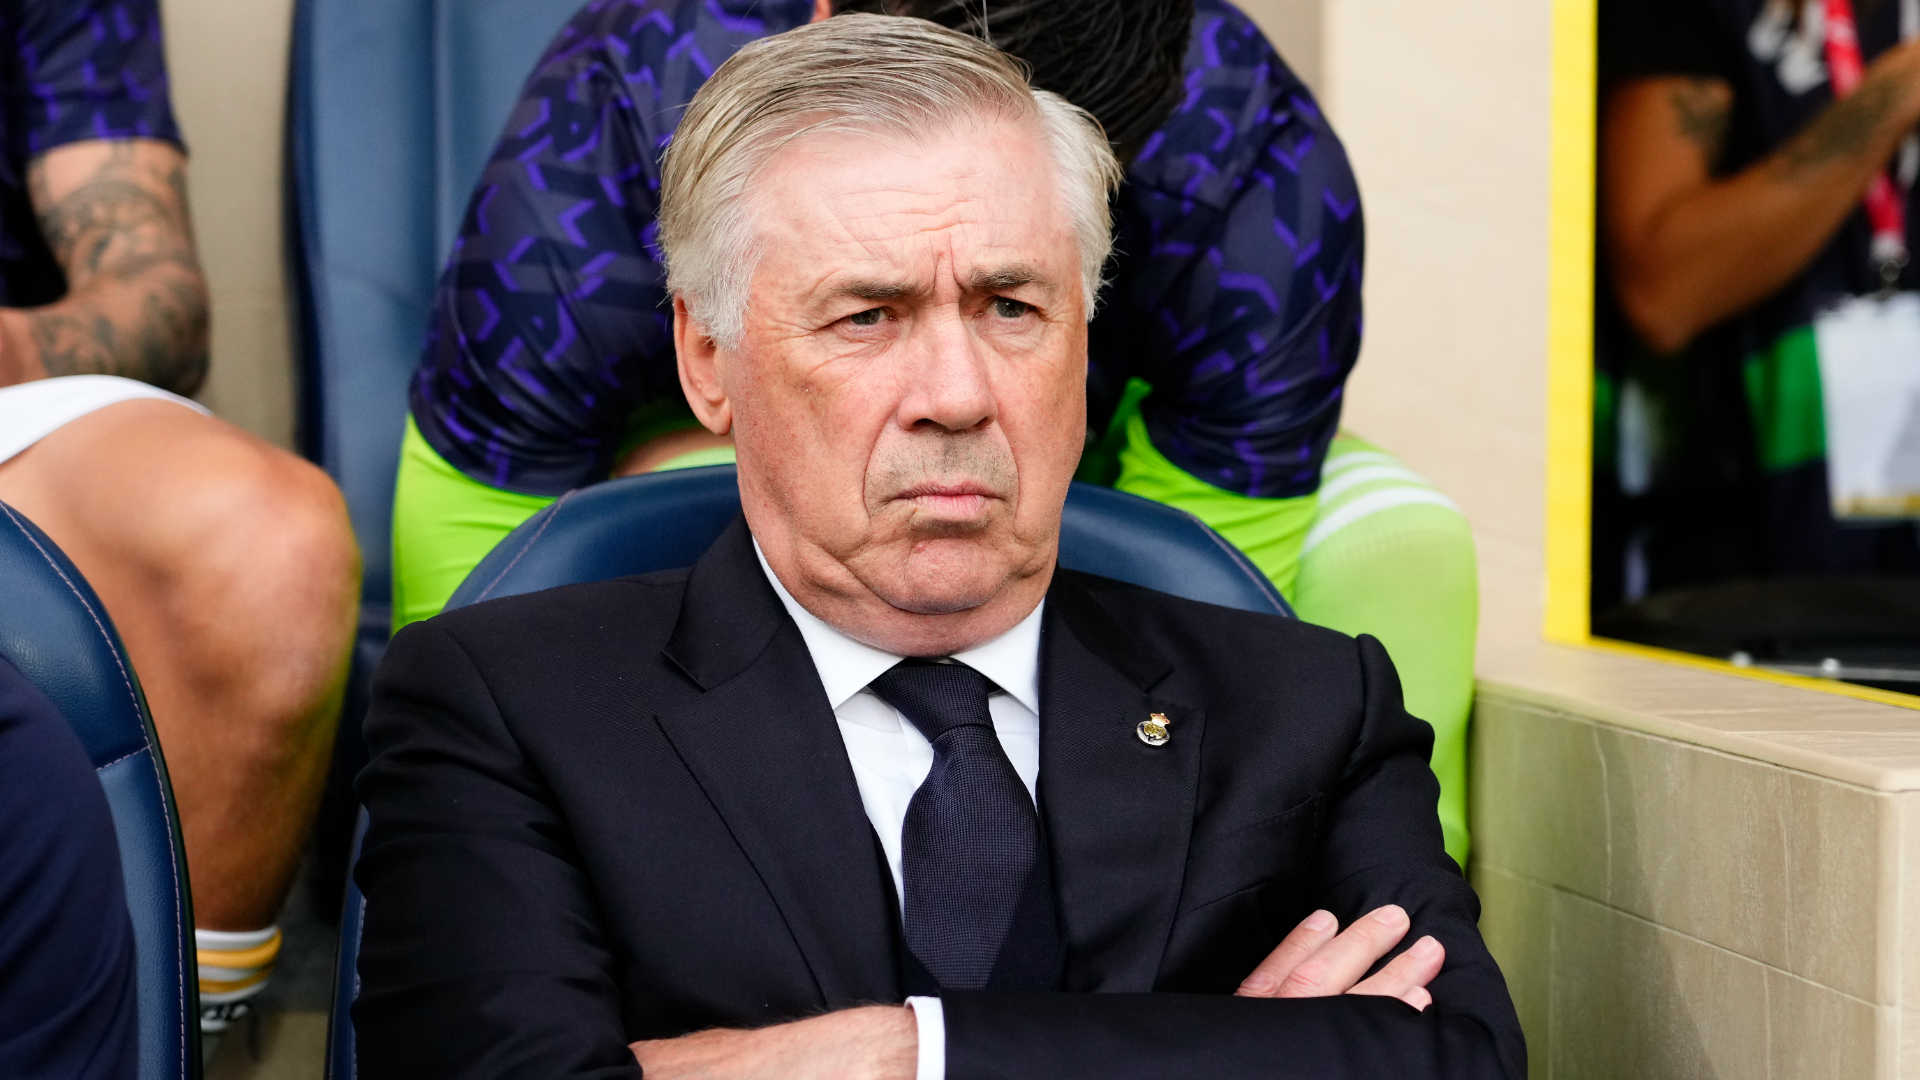 Carlo pleased with Madrid